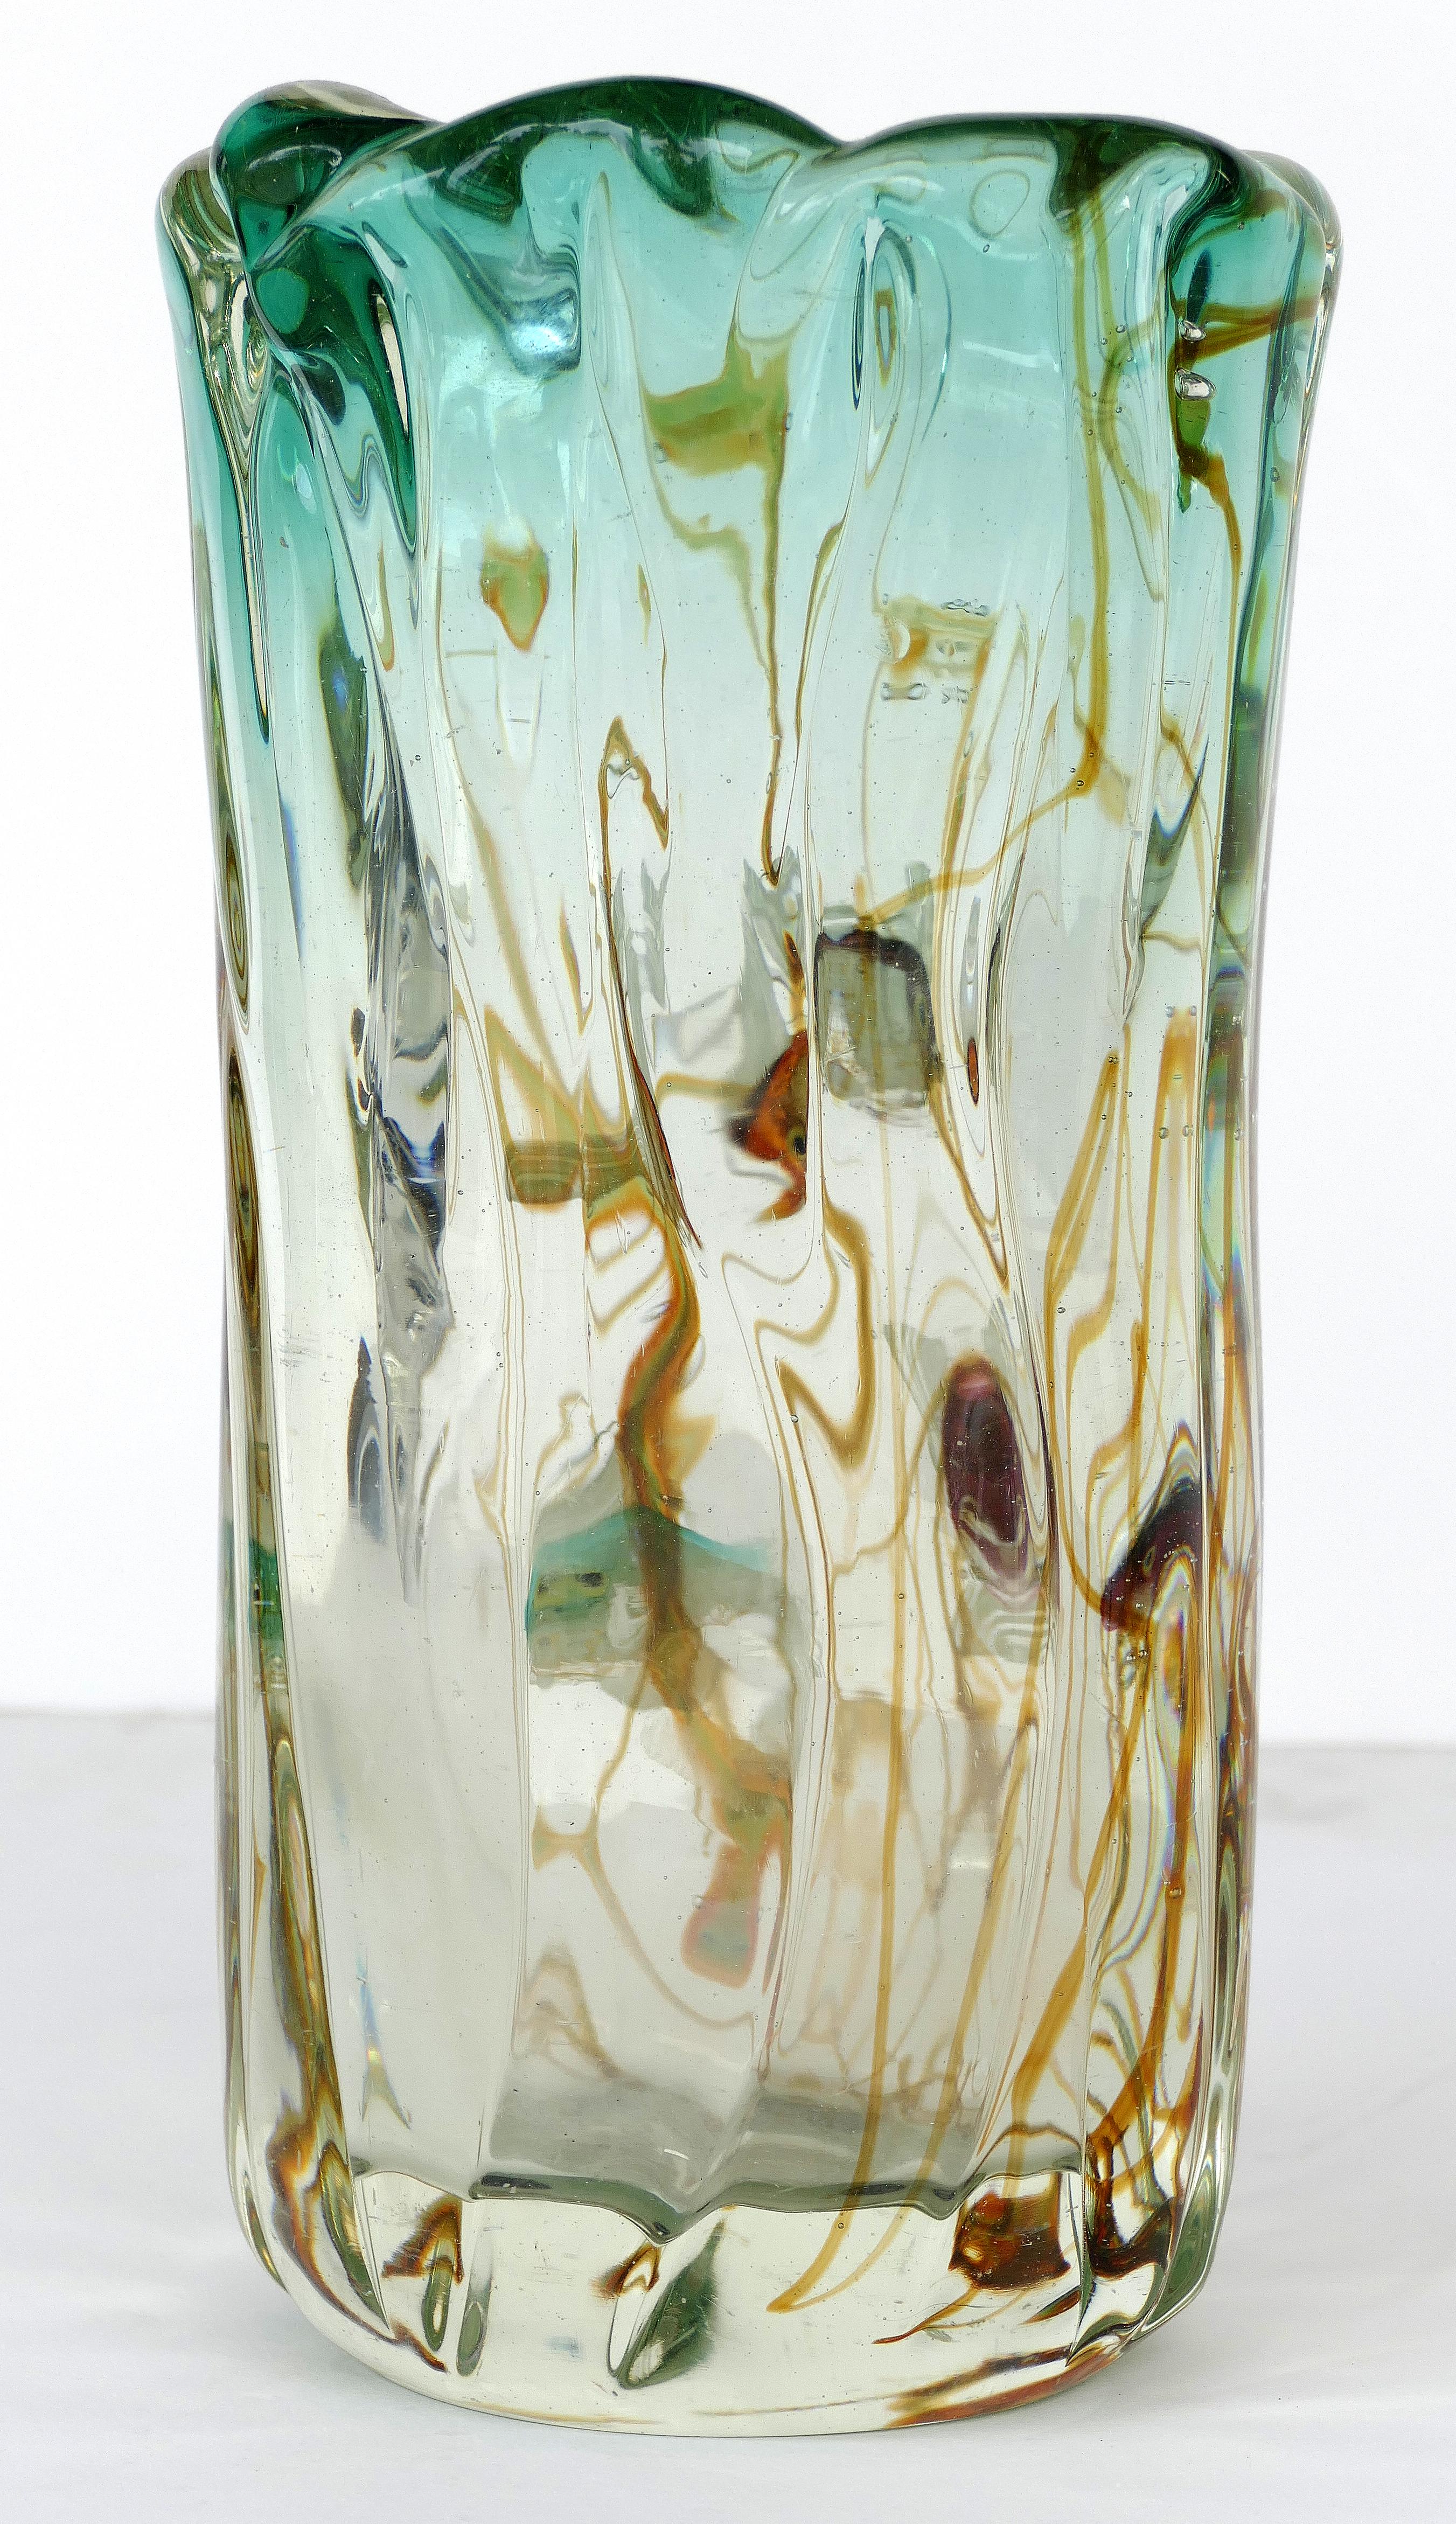 Alfredo Barbini Murano Aquarium vase, Italian, 1950s

Offered for sale is a rare and important Alfredo Barbini (1912-2007) Italian Murano blown glass aquarium vase. This fine example of Barbini's week has wonderful detail to the fish, fabulous